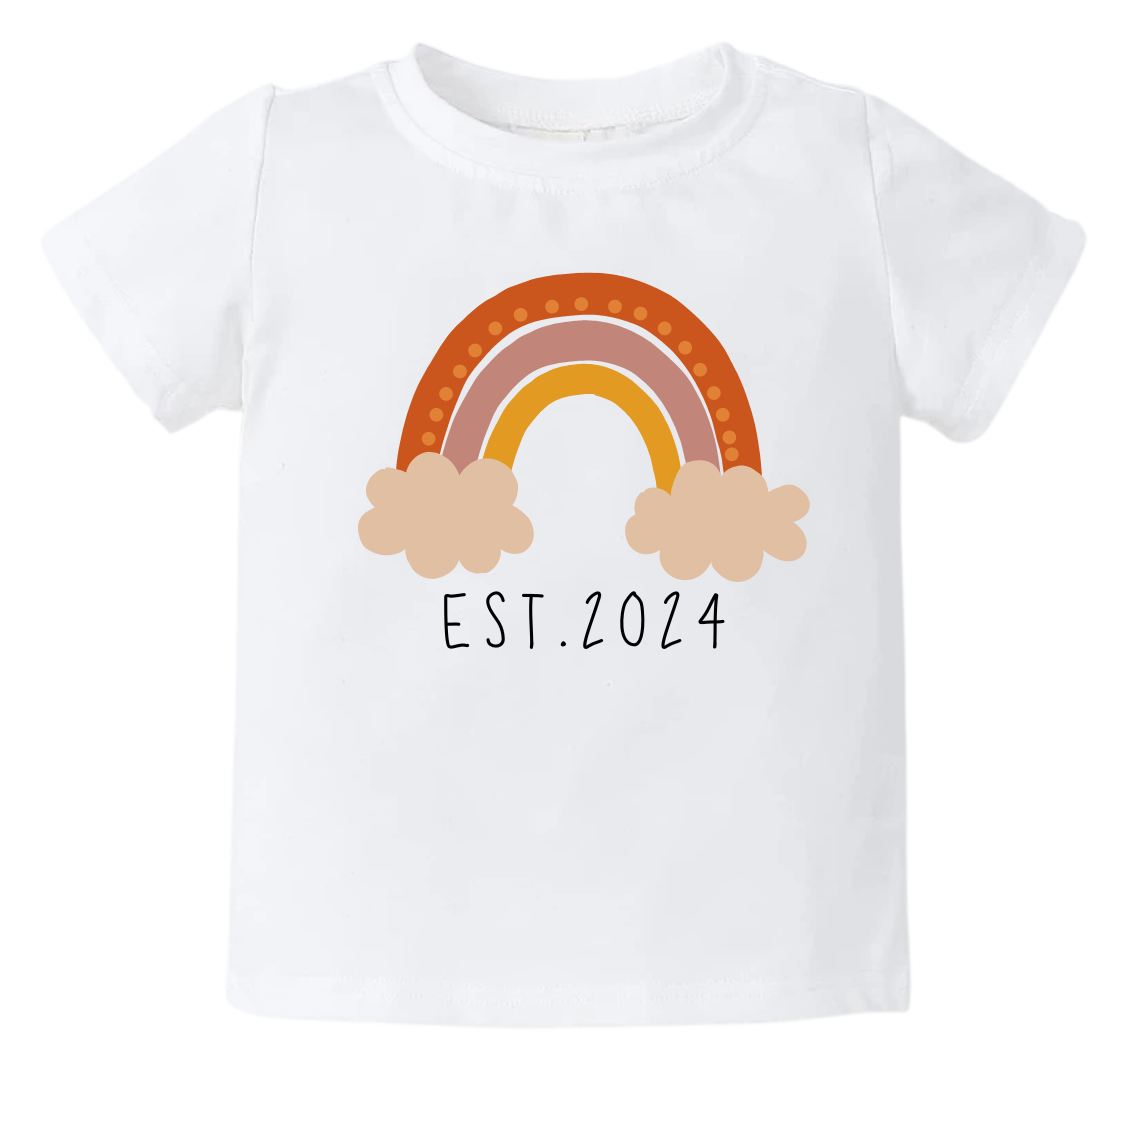 Rainbow Baby Onesie® Custom Rainbow Kid Tshirt Baby Announcement Baby Outfit for Baby Gift for Baby Shower Gift